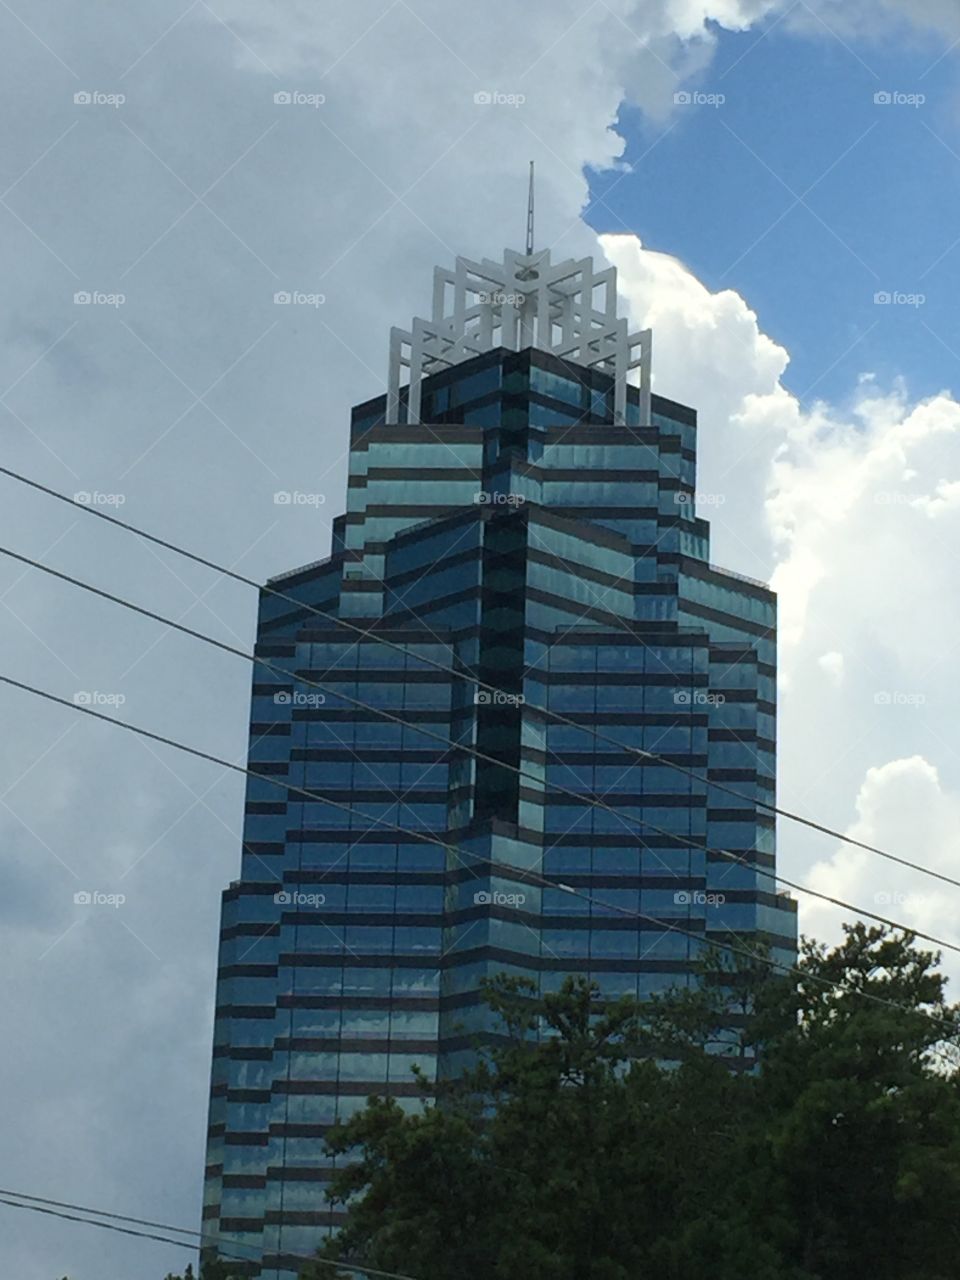 Clouds around the building